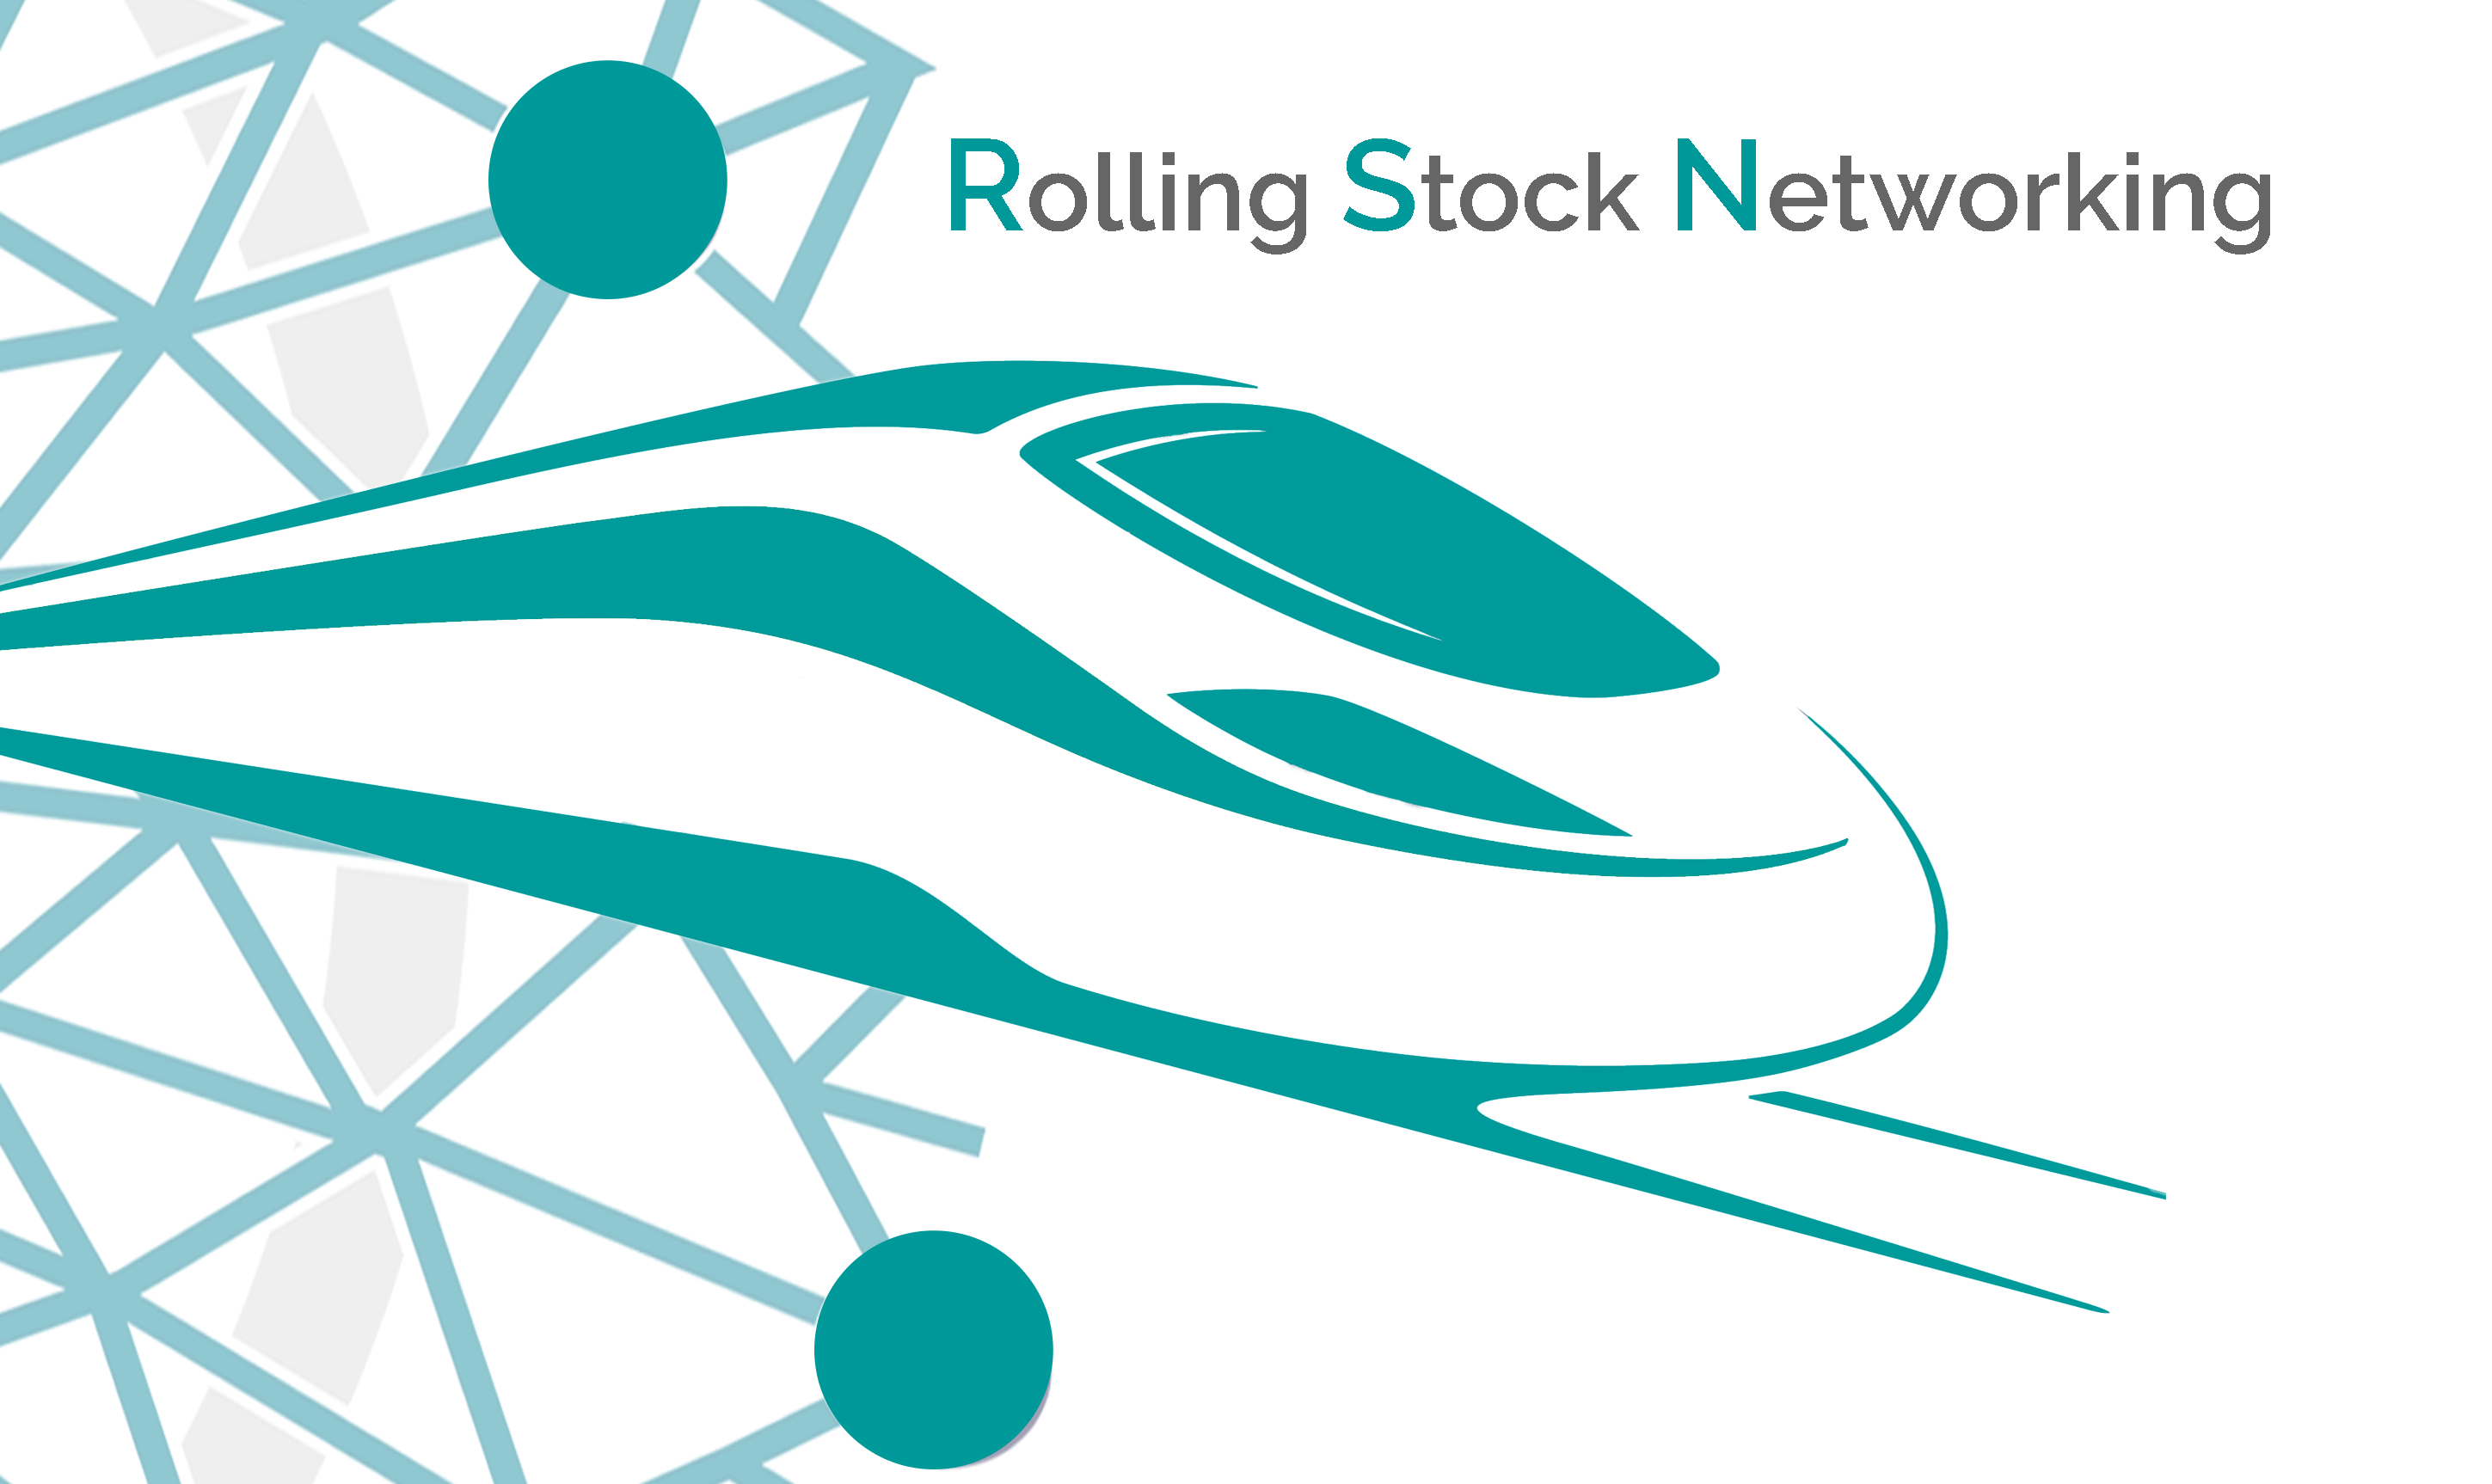 Rolling Stock Networking logo.